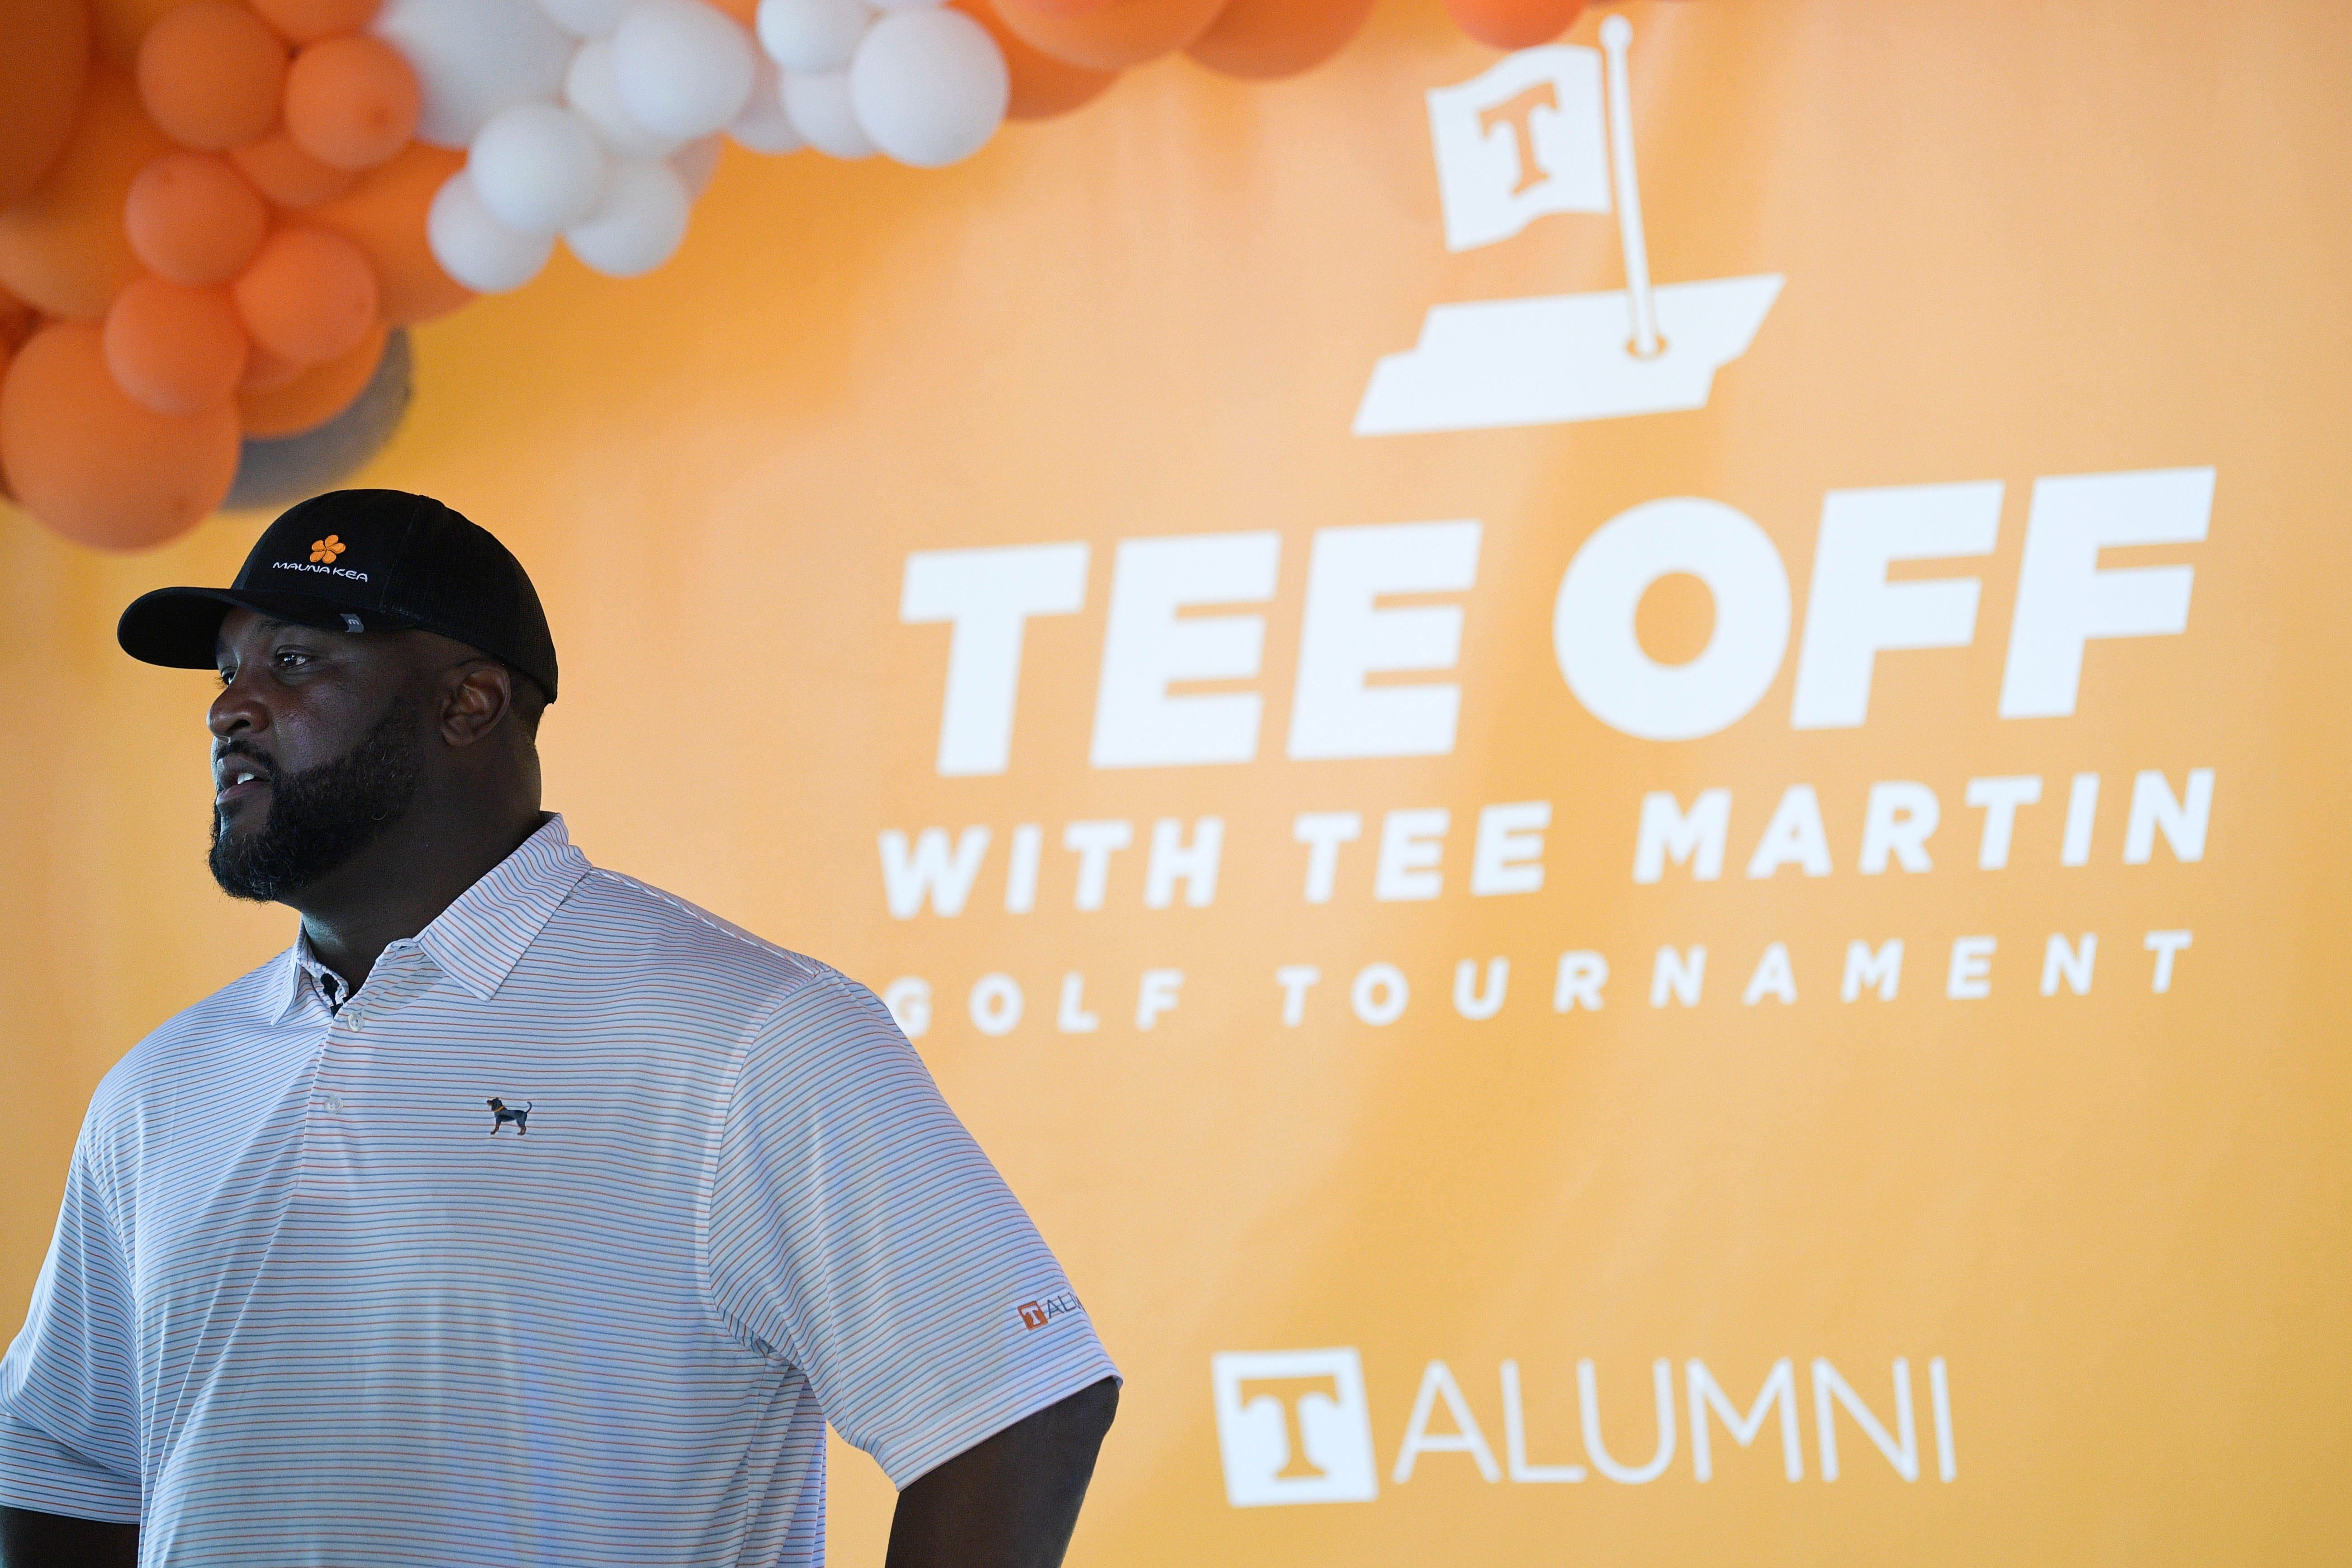 Tennessee football legend Tee Martin elevated to Baltimore Ravens QB coach